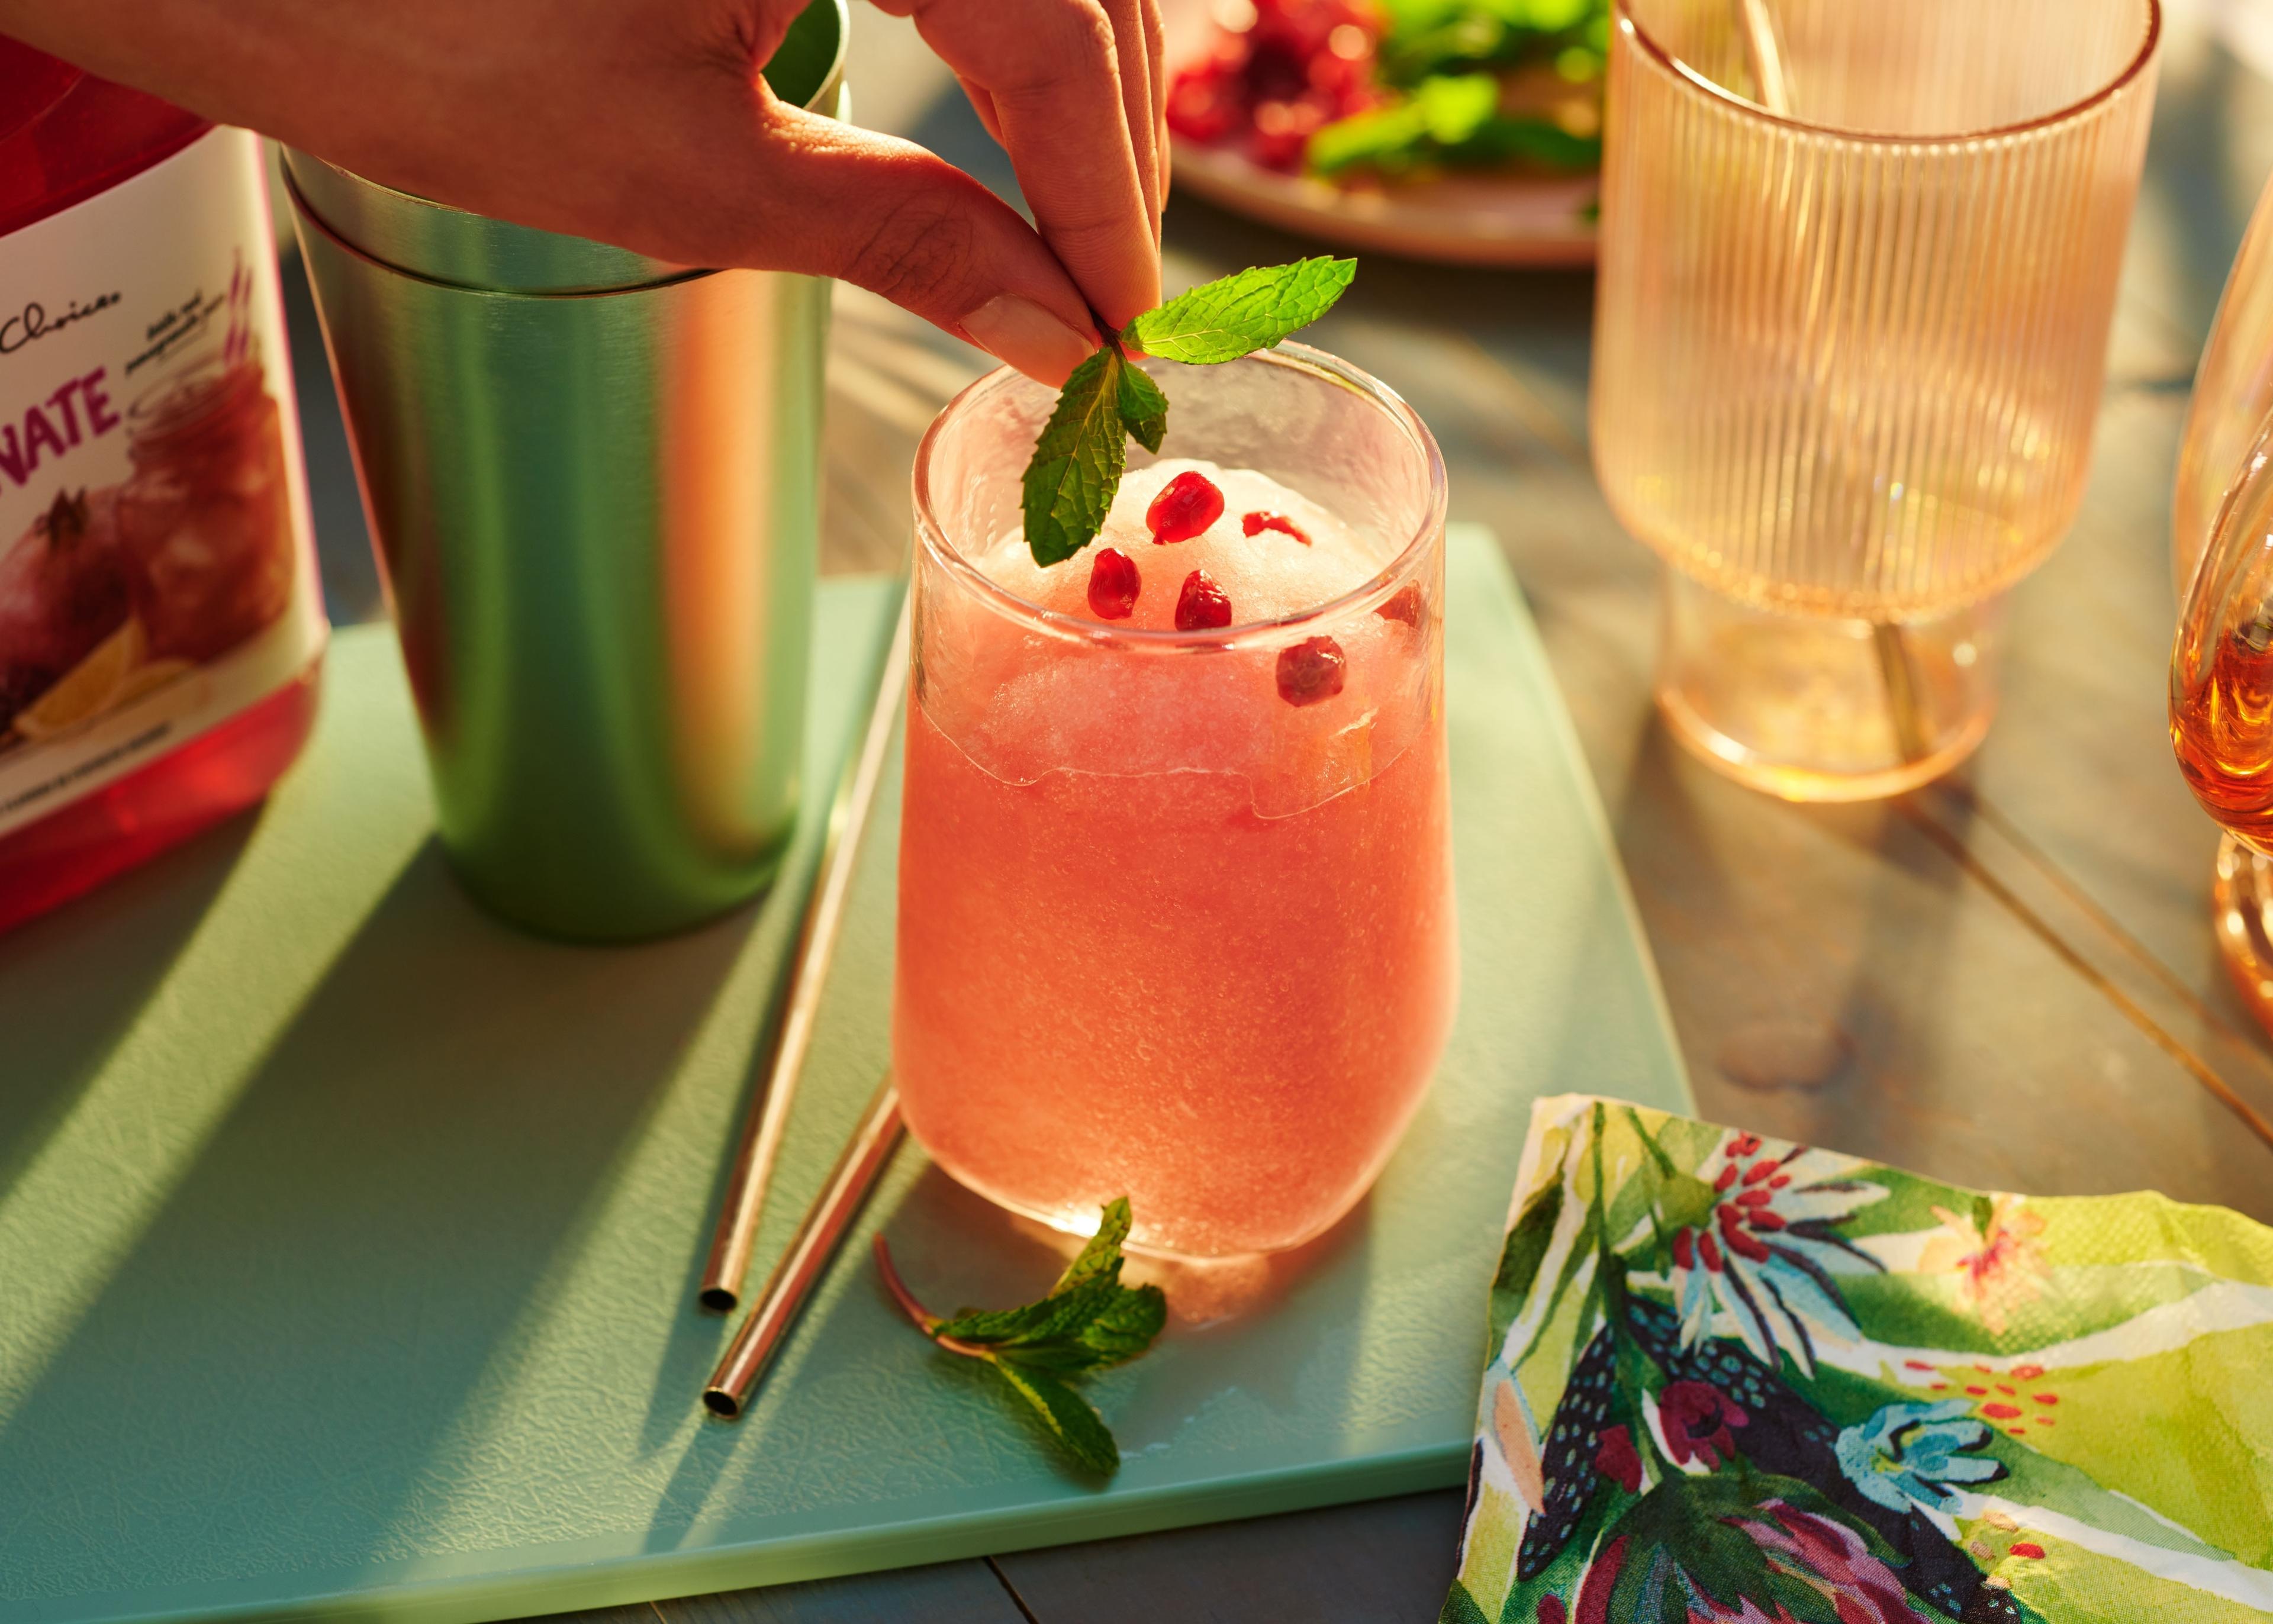 beautifully styled cranberry and crushed ice drink with hand gently placing a final touch of mint leaves. The glass is sitting on a morning-lit counter-top with cutting board and straws, napkins.